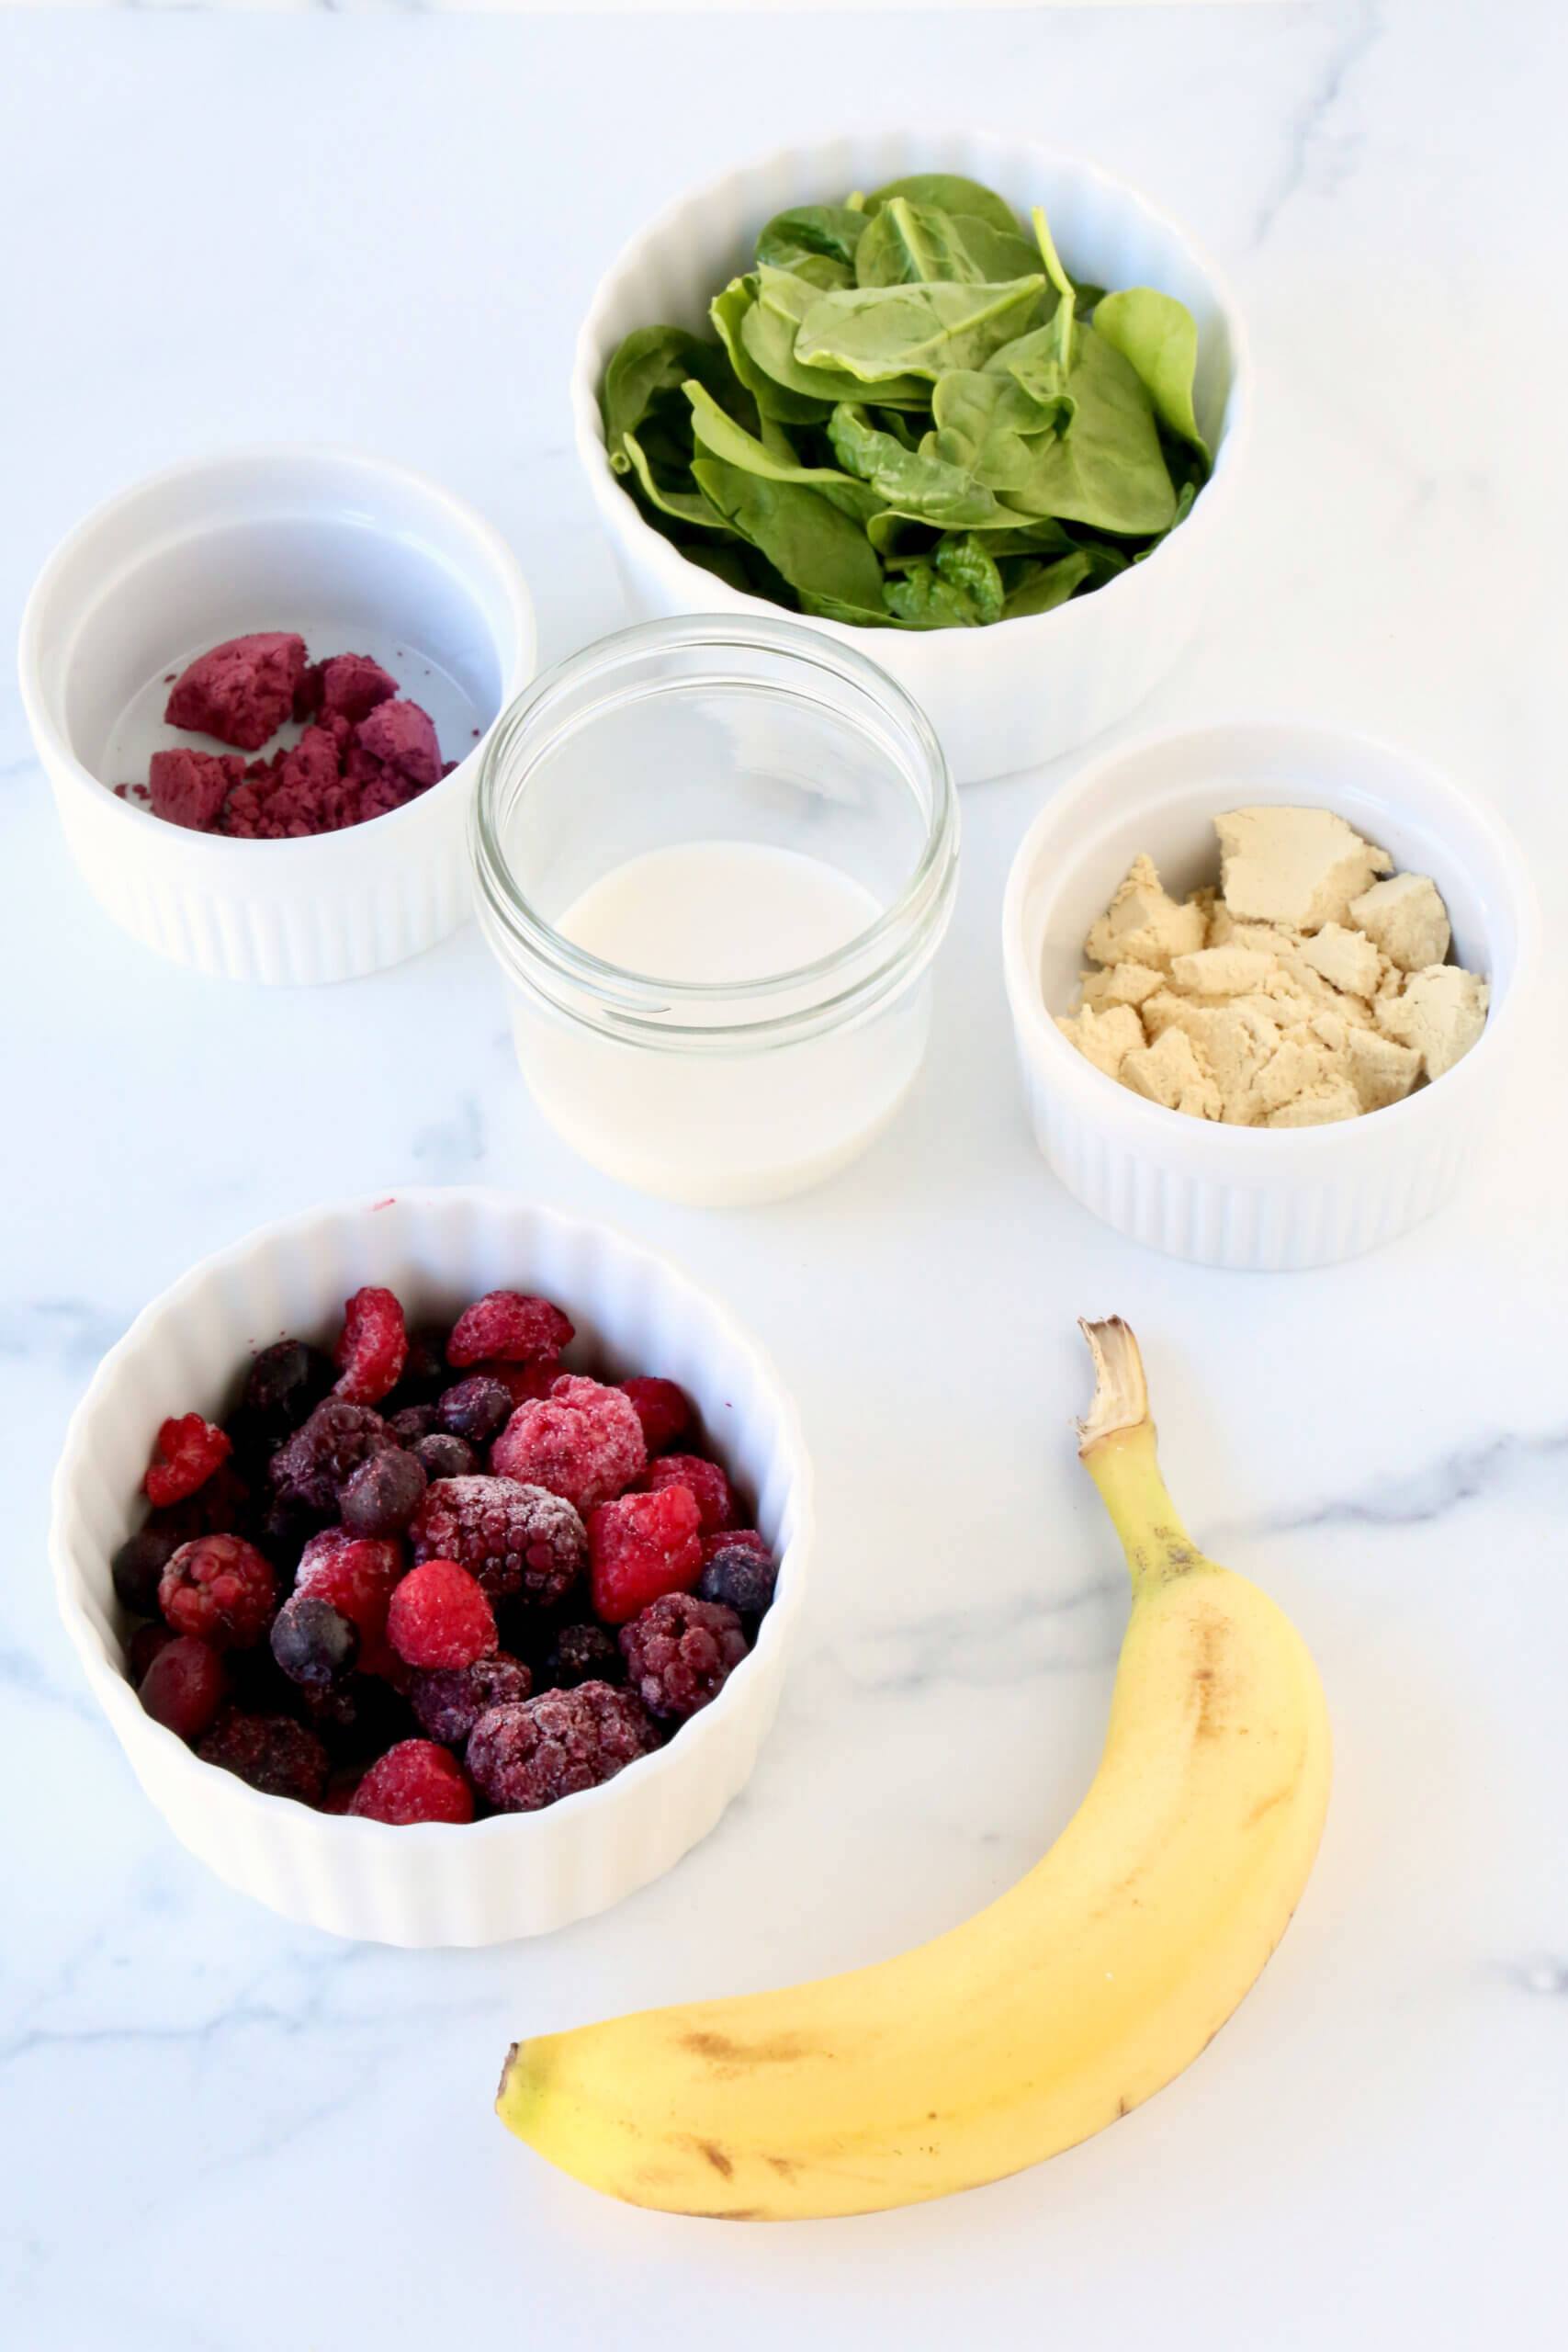 Bowls filled with spinach, mixed berries, protein powder, açaí powder, a jar with almond milk and a banana.  